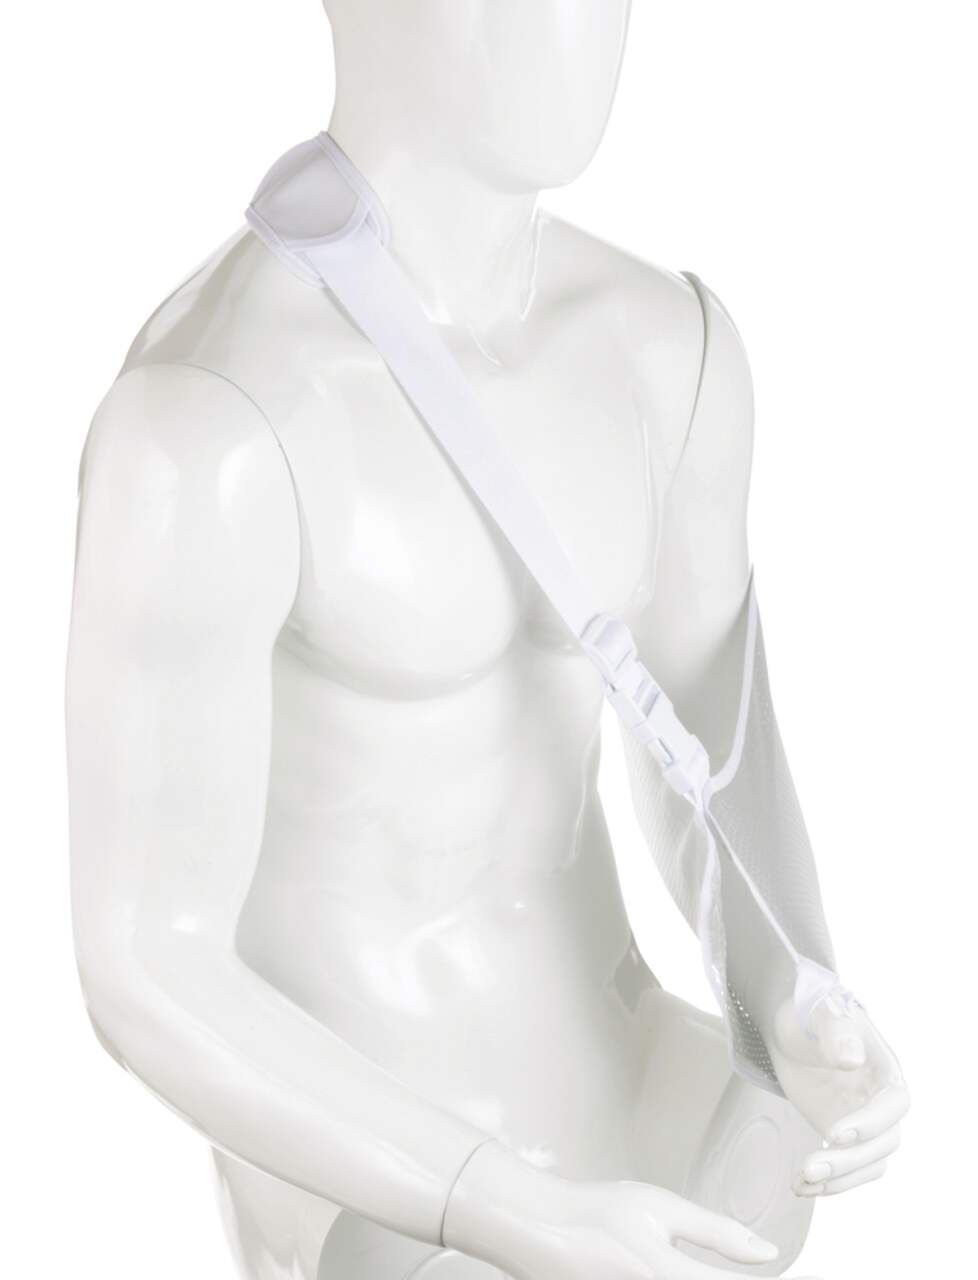 Willcom Arm Sling for Shoulder Injury with Waist Strap